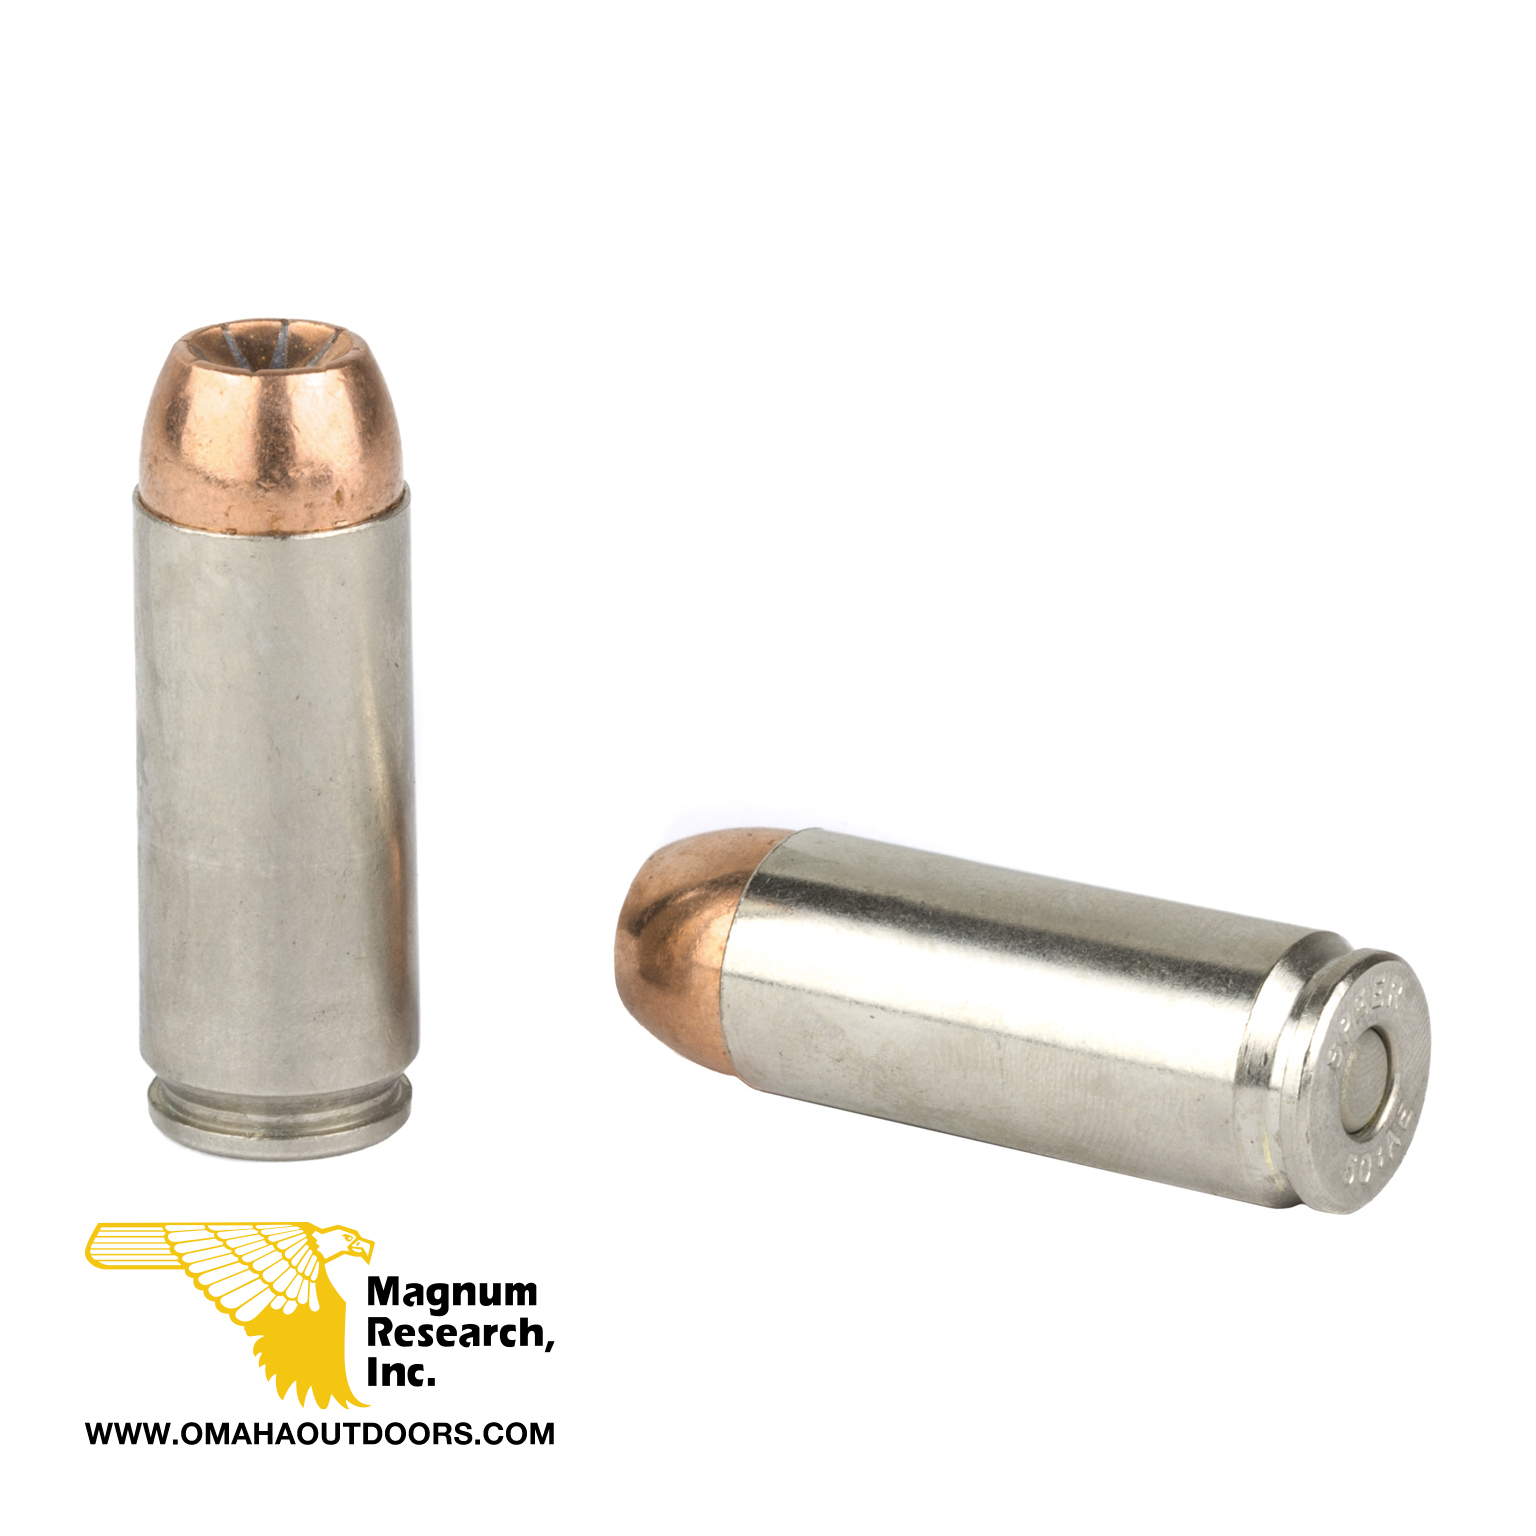 What Are Bullets Made Of? - The Lodge at AmmoToGo.com